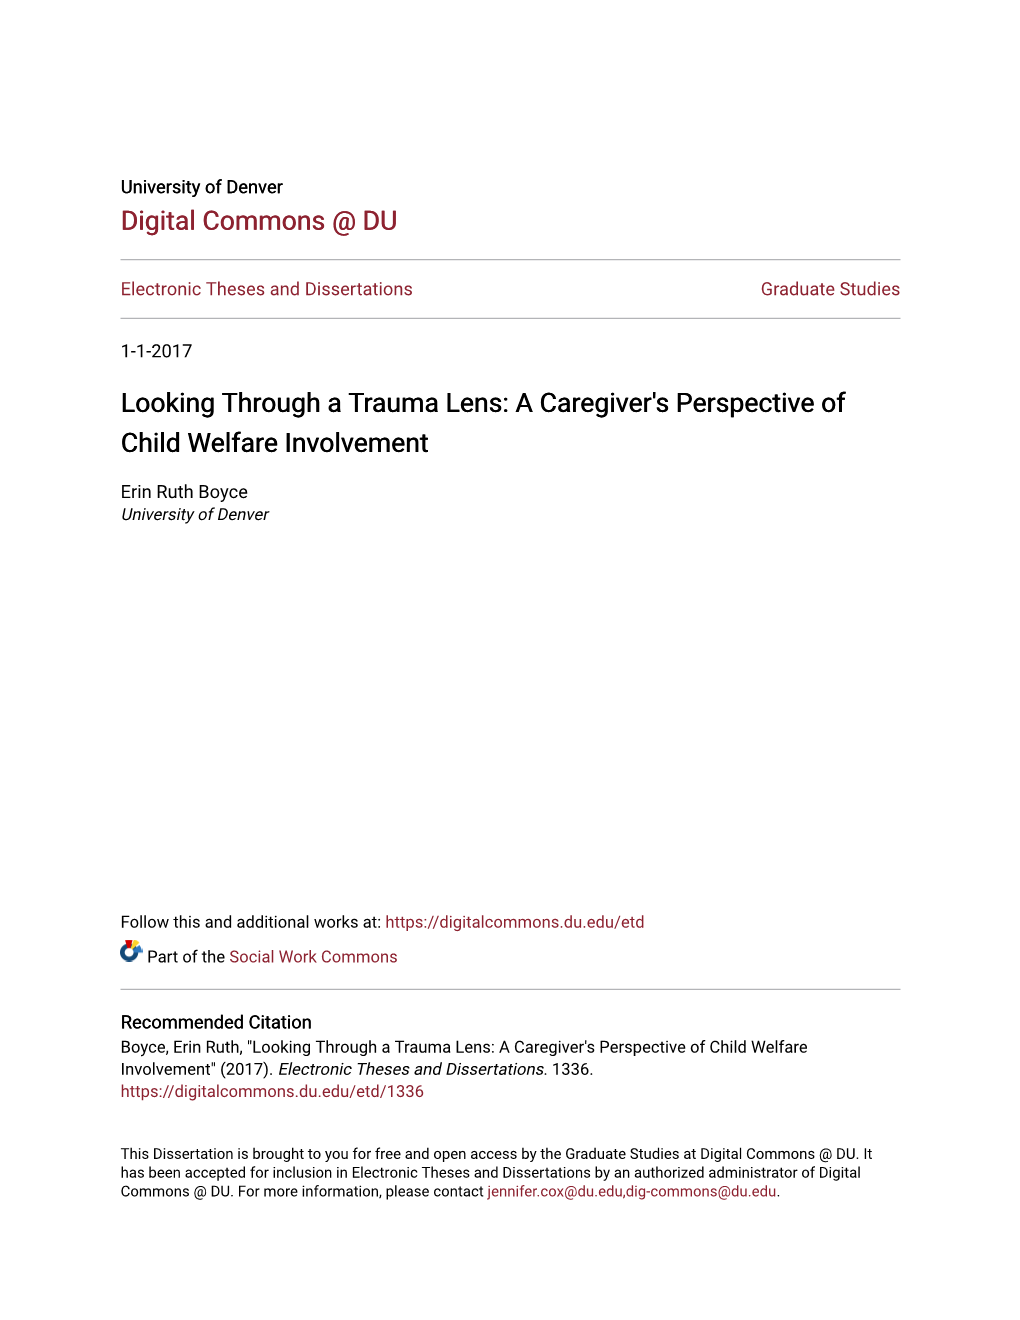 Looking Through a Trauma Lens: a Caregiver's Perspective of Child Welfare Involvement